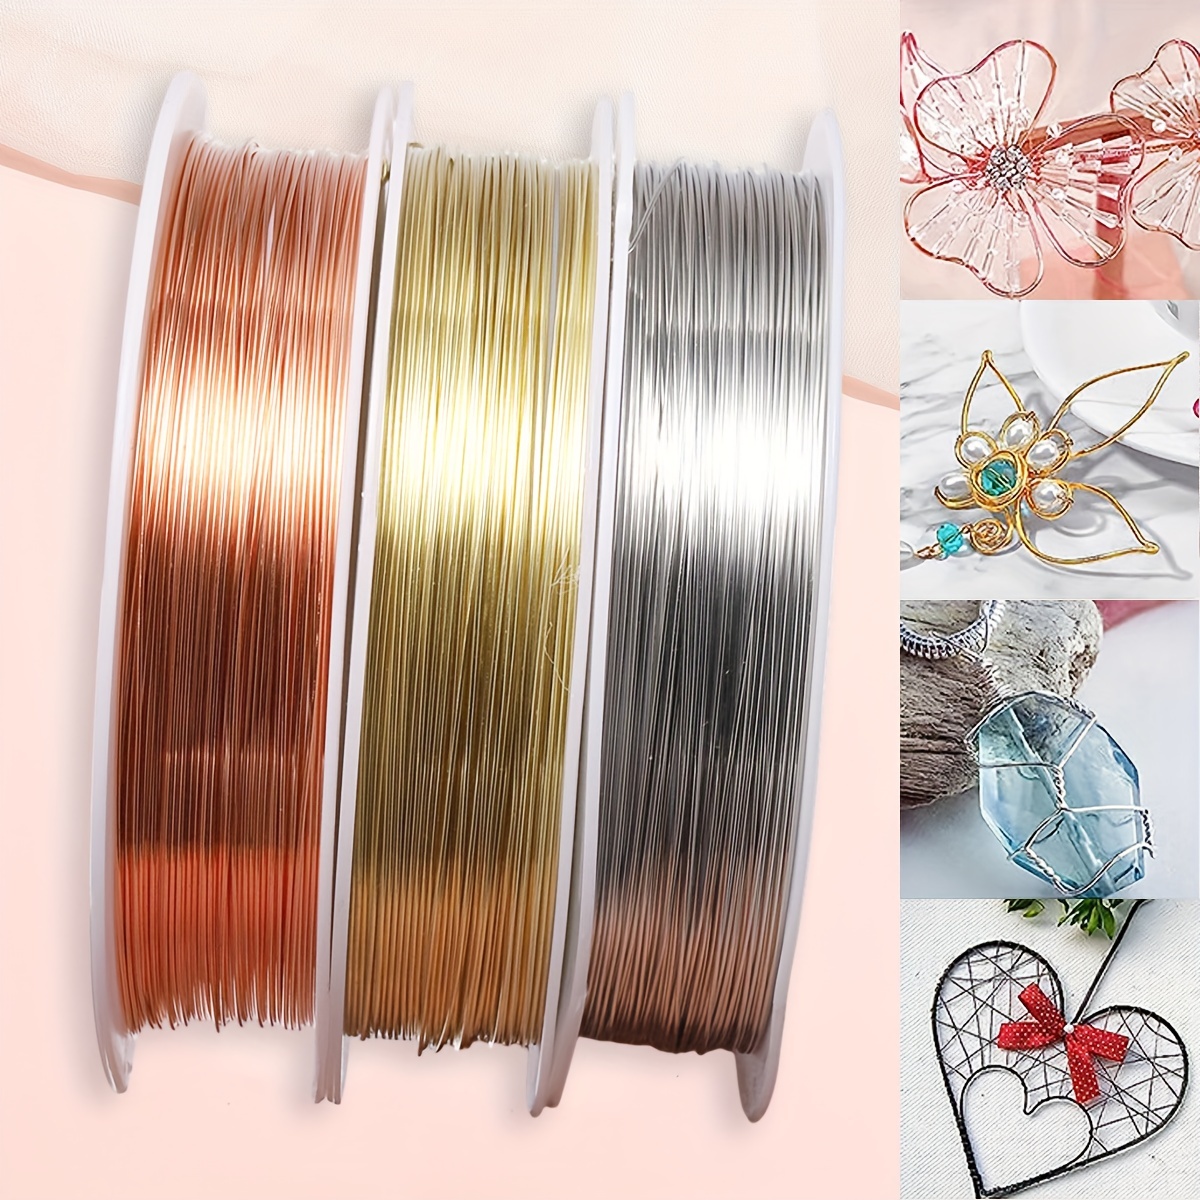 0.3-1.0 mm Brass Copper Wires Beading Wire For Jewelry Making